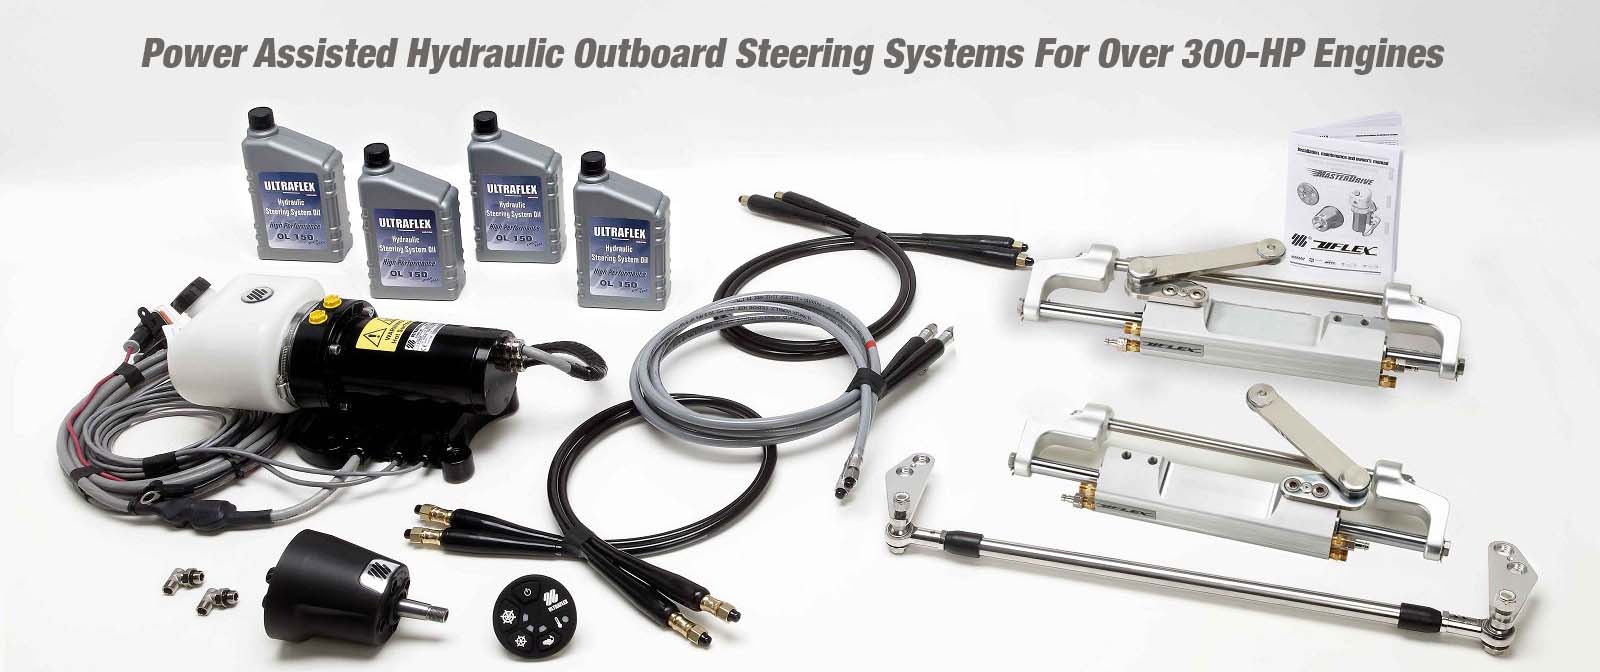 Power Assisted Outboard Hydraulic Steering Systems Over 300 HP Engines